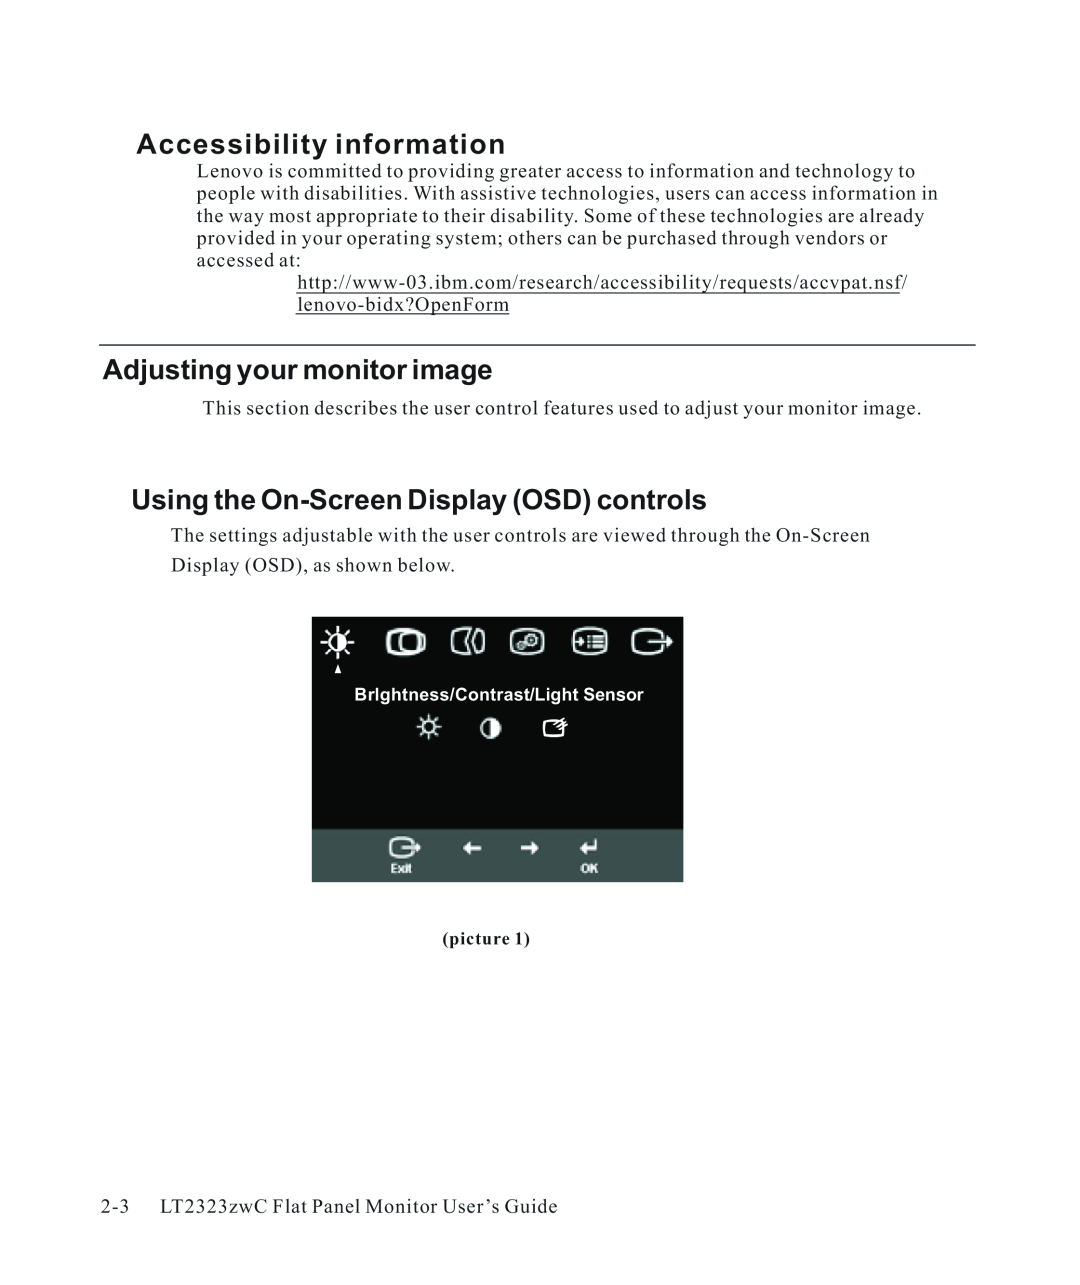 Lenovo 3028LB2 manual Accessibility information, Adjusting your monitor image, Using the On-Screen Display OSD controls 